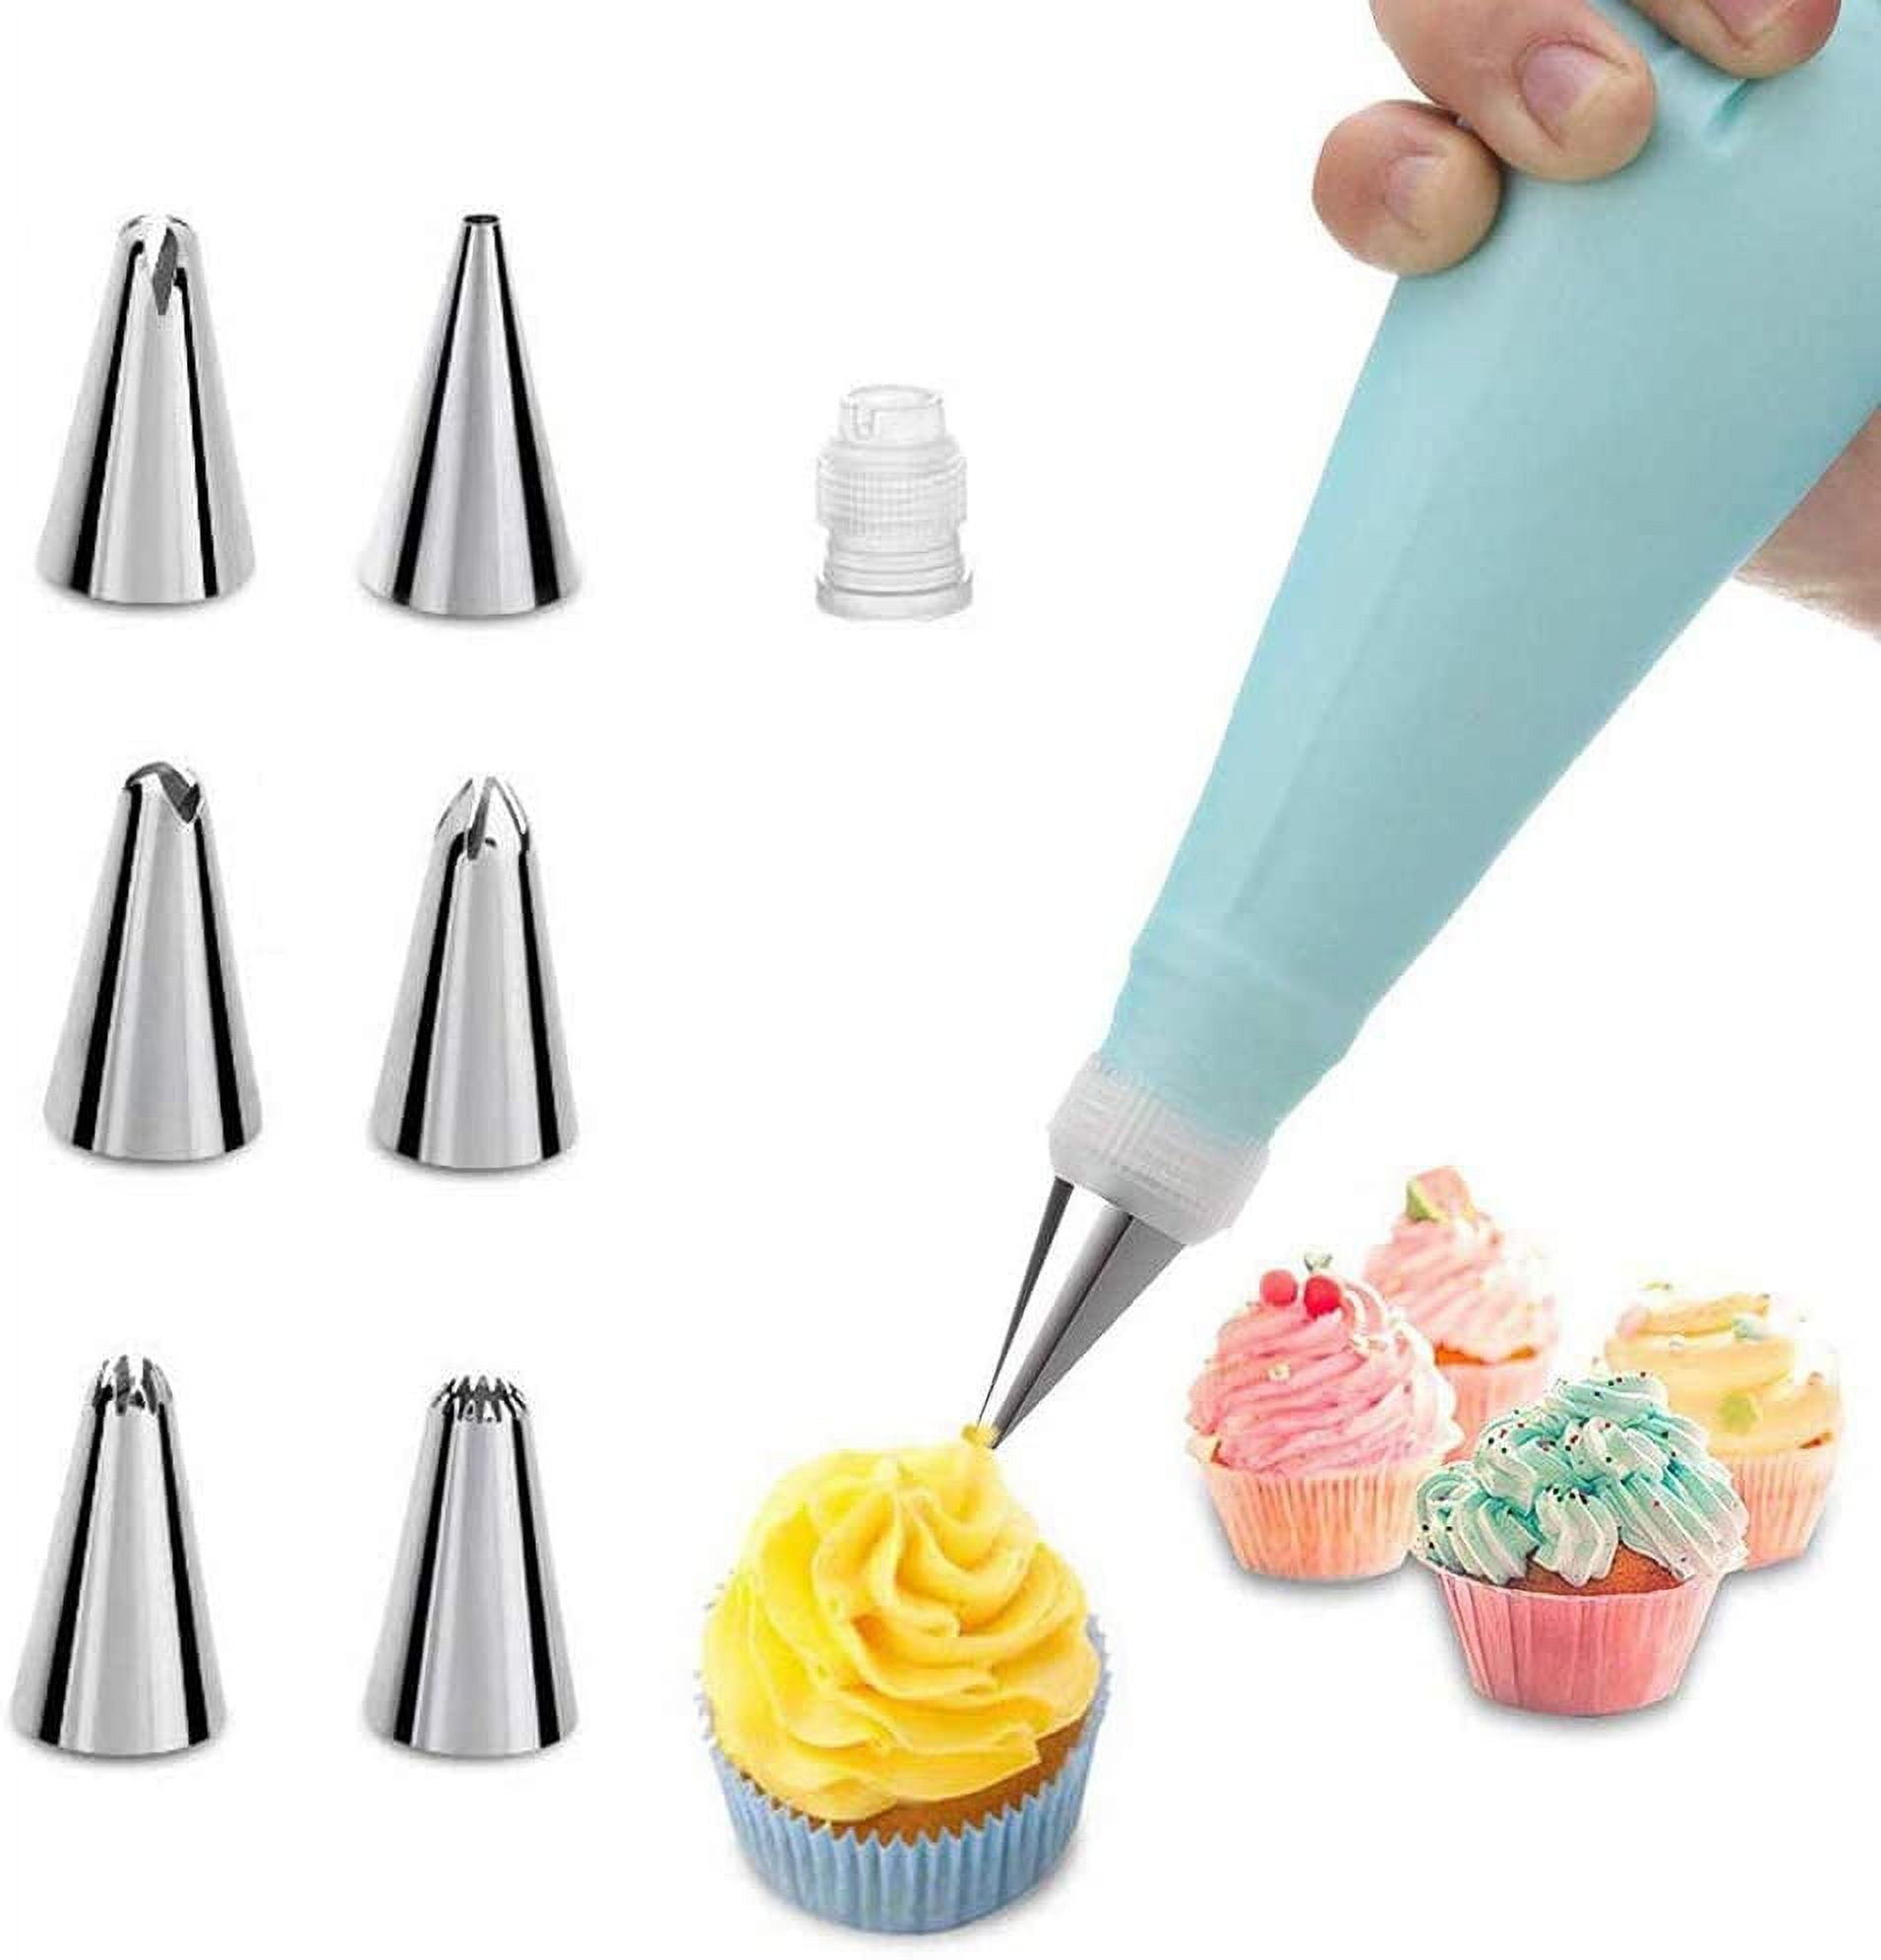 Makmeng Cake Decorating Tools Supplies Kit - 368Pcs Baking Supplies with  Storage Case for Beginners - Icing Piping Bags and Tips Set For Cookies